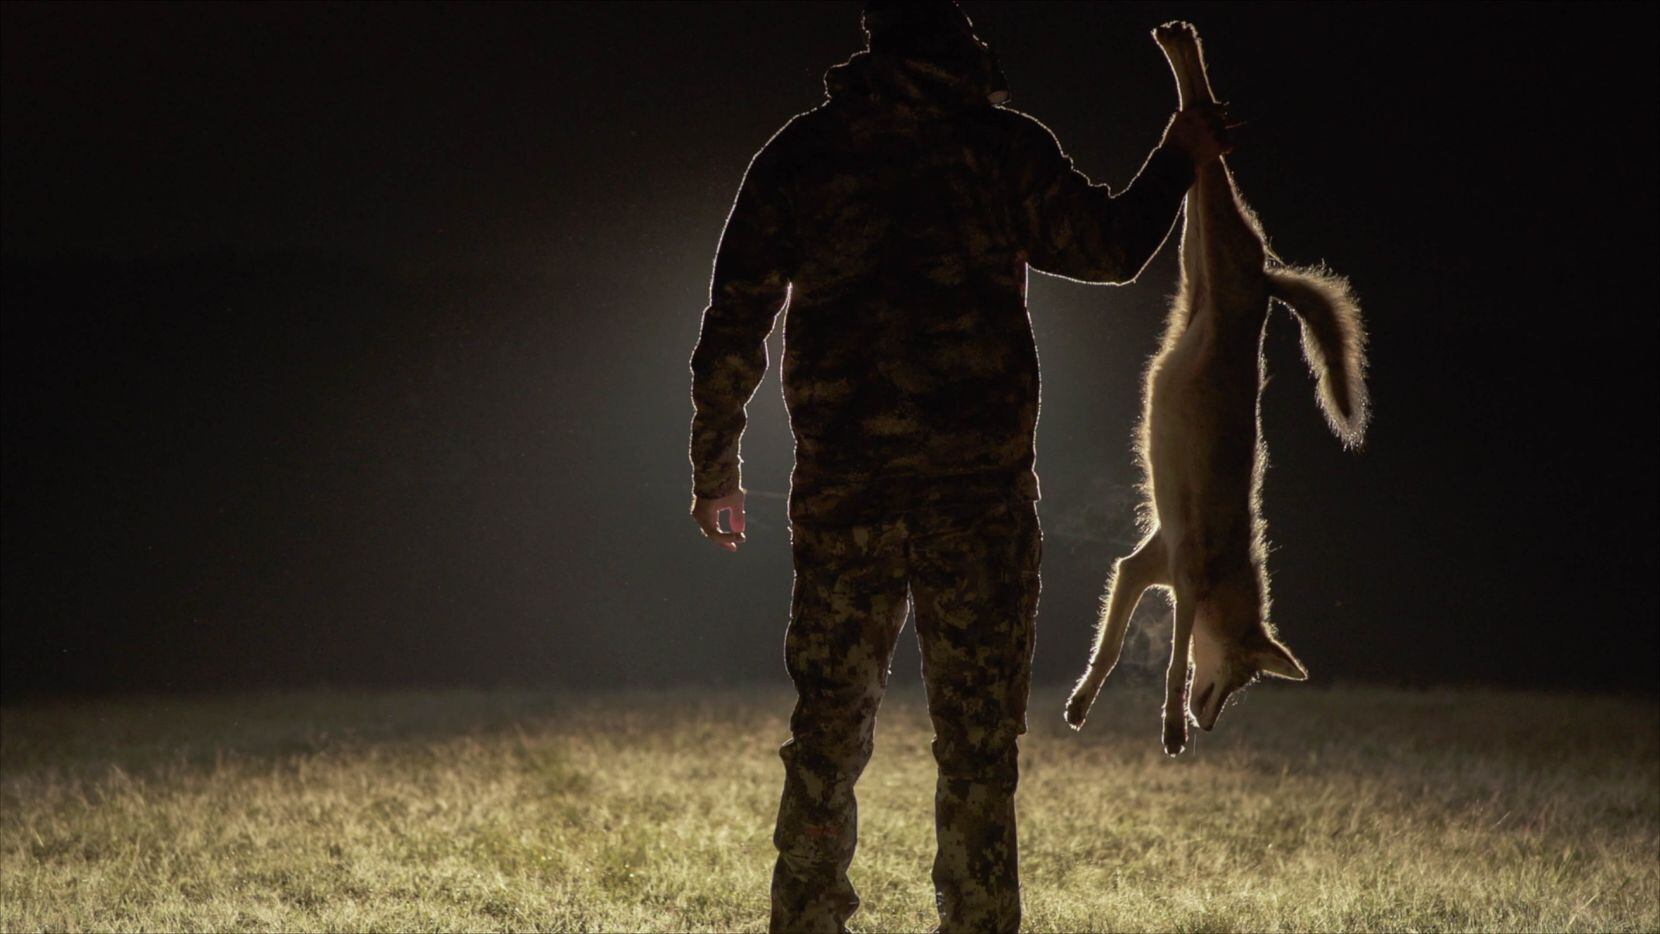 One of the main allures of predator hunting is calling coyotes, foxes, bobcats and other inherently wary critters into shooting range, often under the cover of darkness.